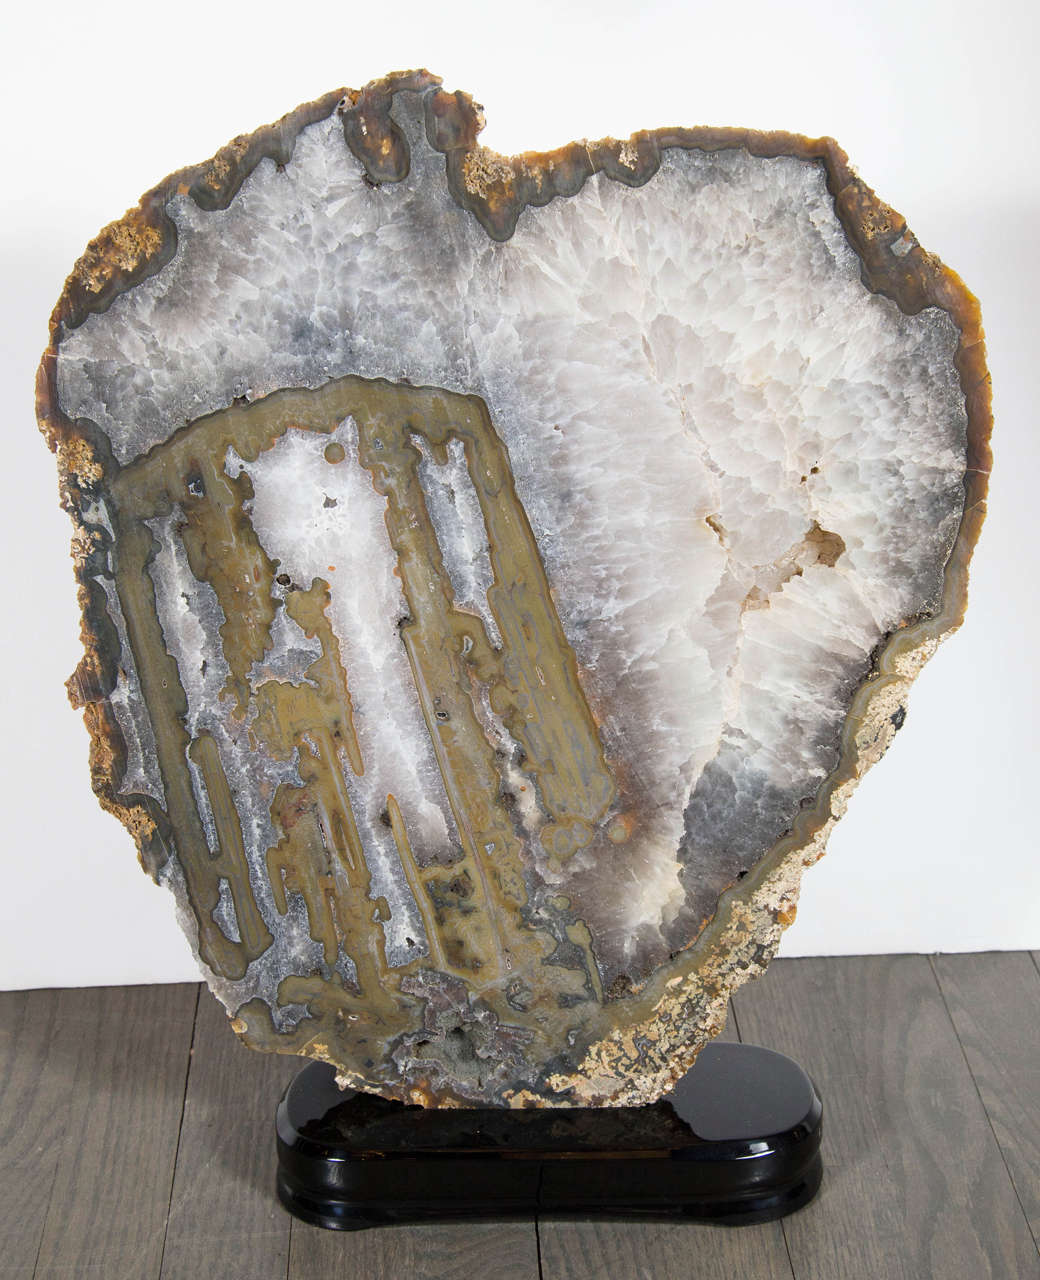 This luxurious sliced organic rock specimen is dazzling. It features gorgeous hues of tobacco,pearl & umber, and is mounted on an ebonized walnut base. It would look extremely sophisticated  in any room or decor.